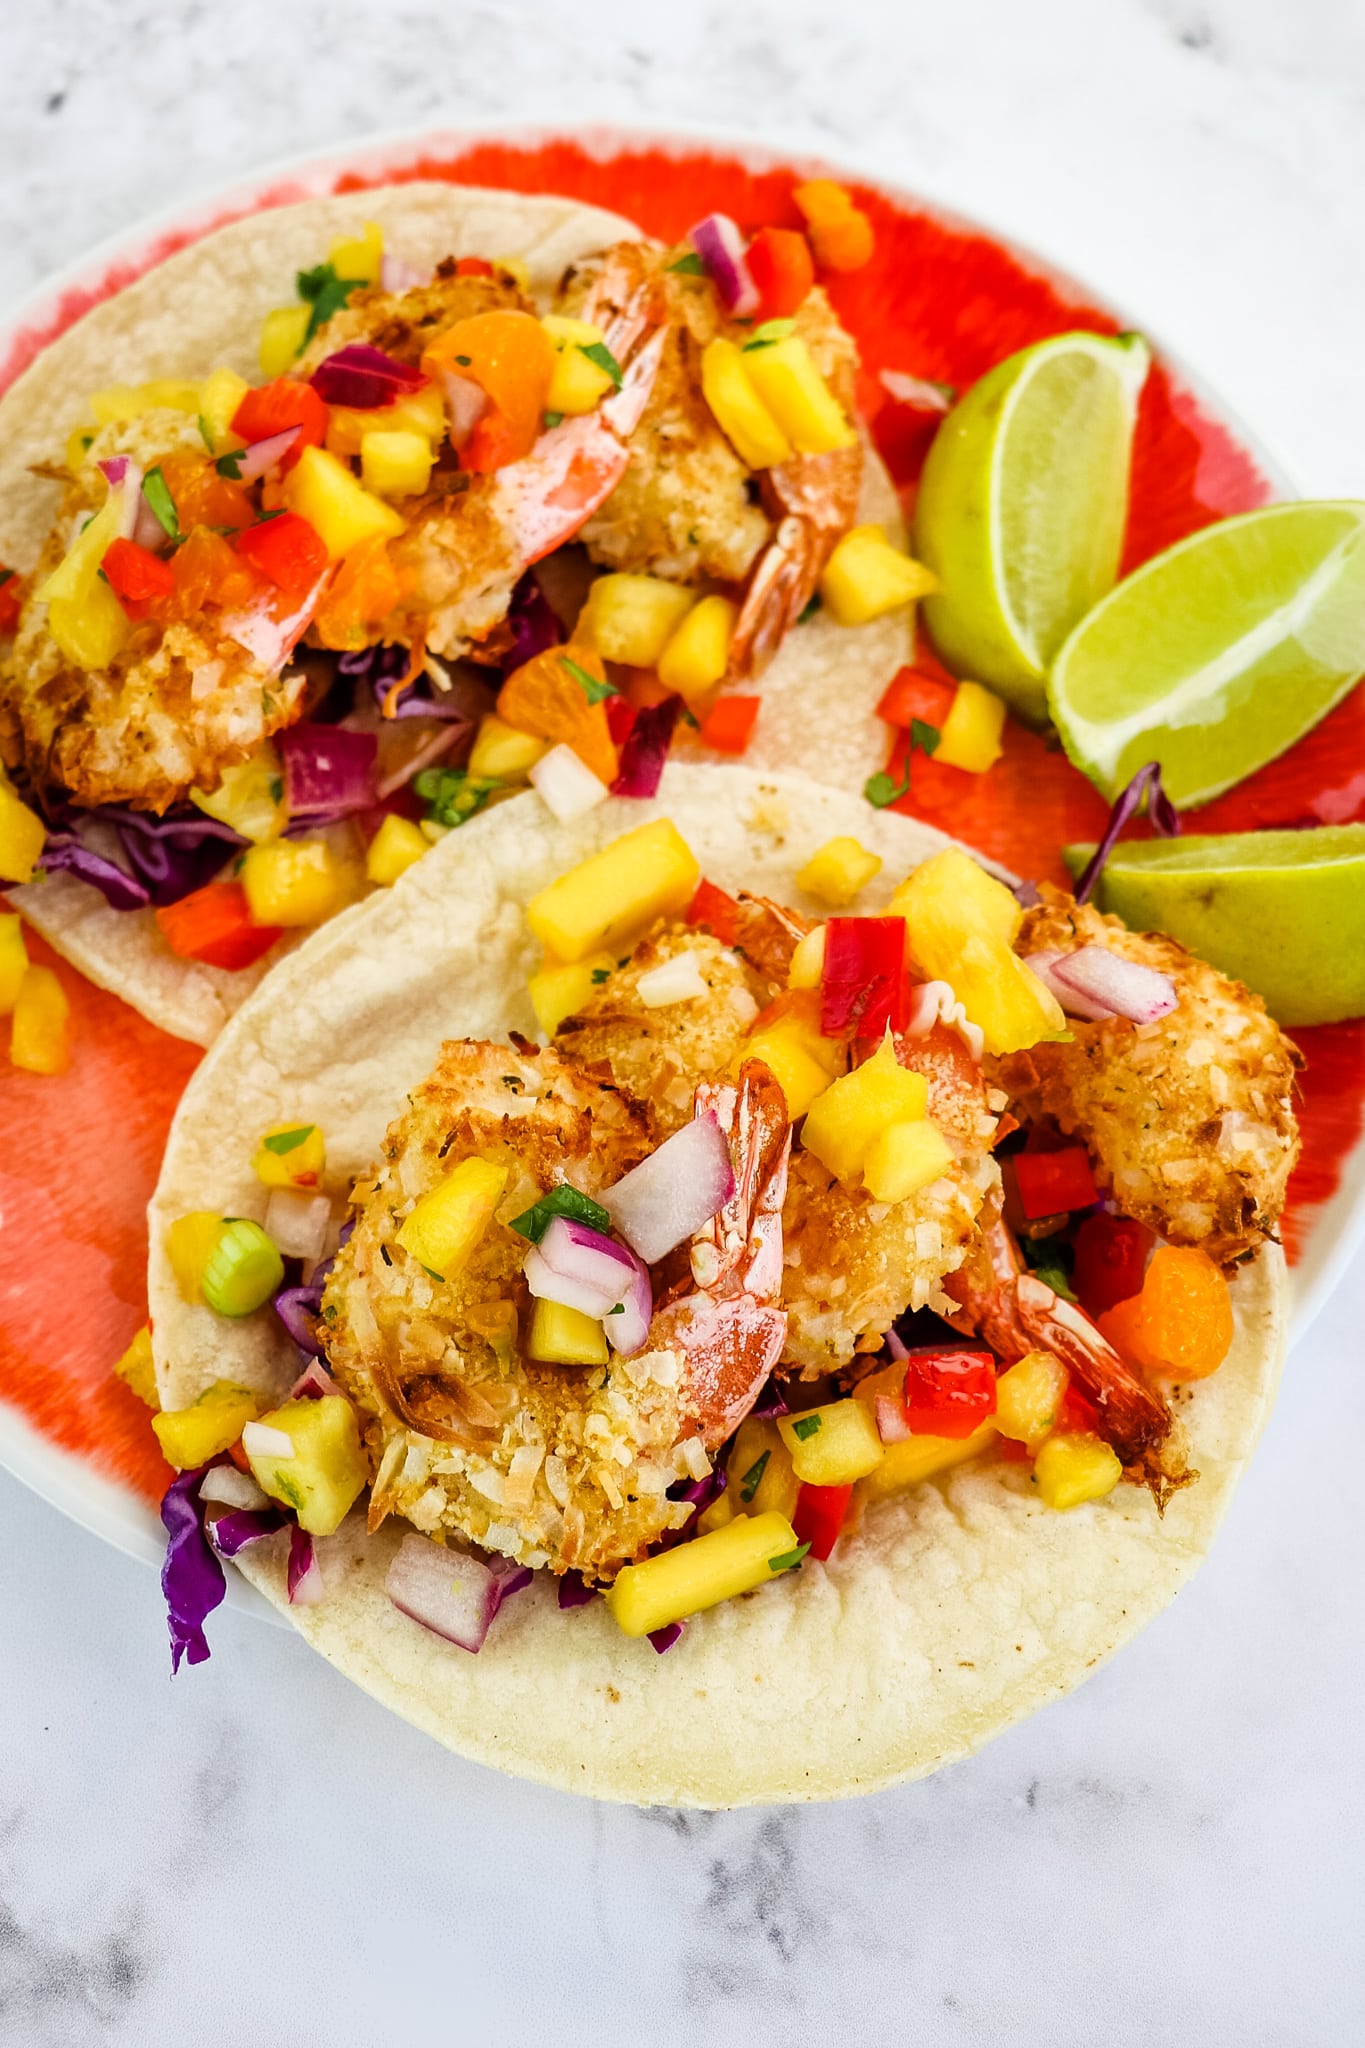 Coconut shrimp served as tacos with pineapple mango salsa and lime wedges.